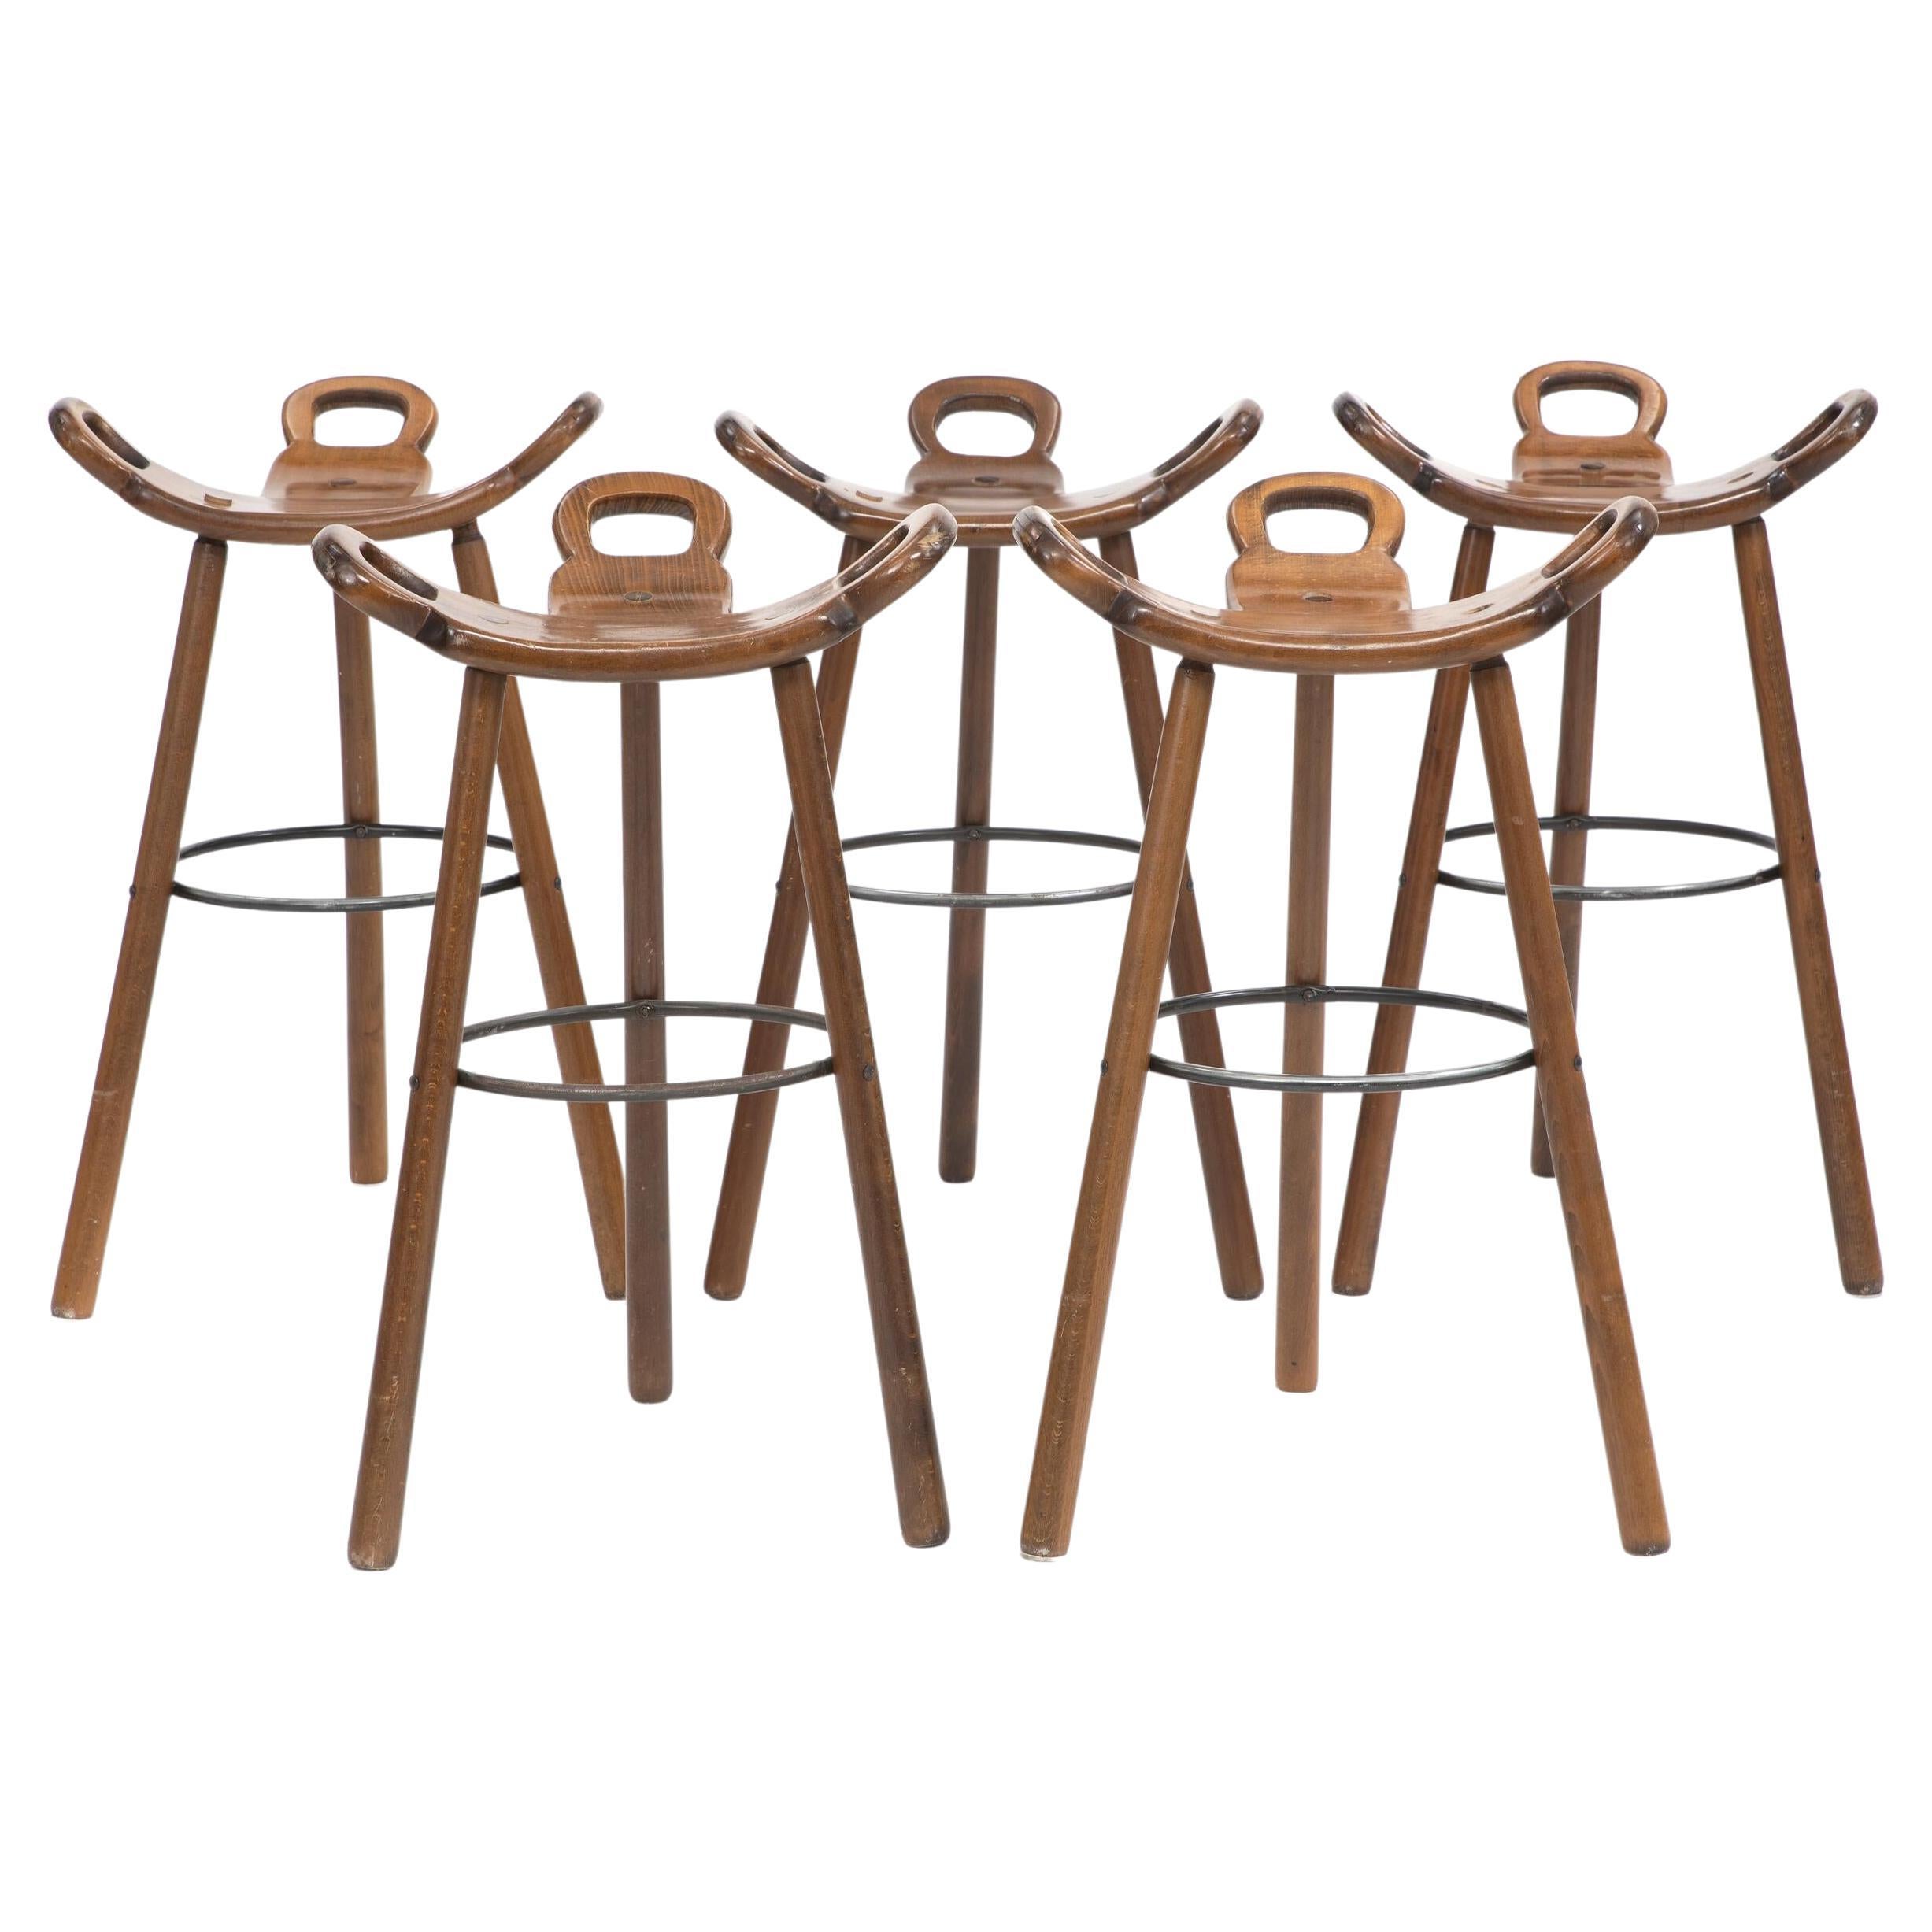 Confonorm Bar Stool Made of Beech For Sale